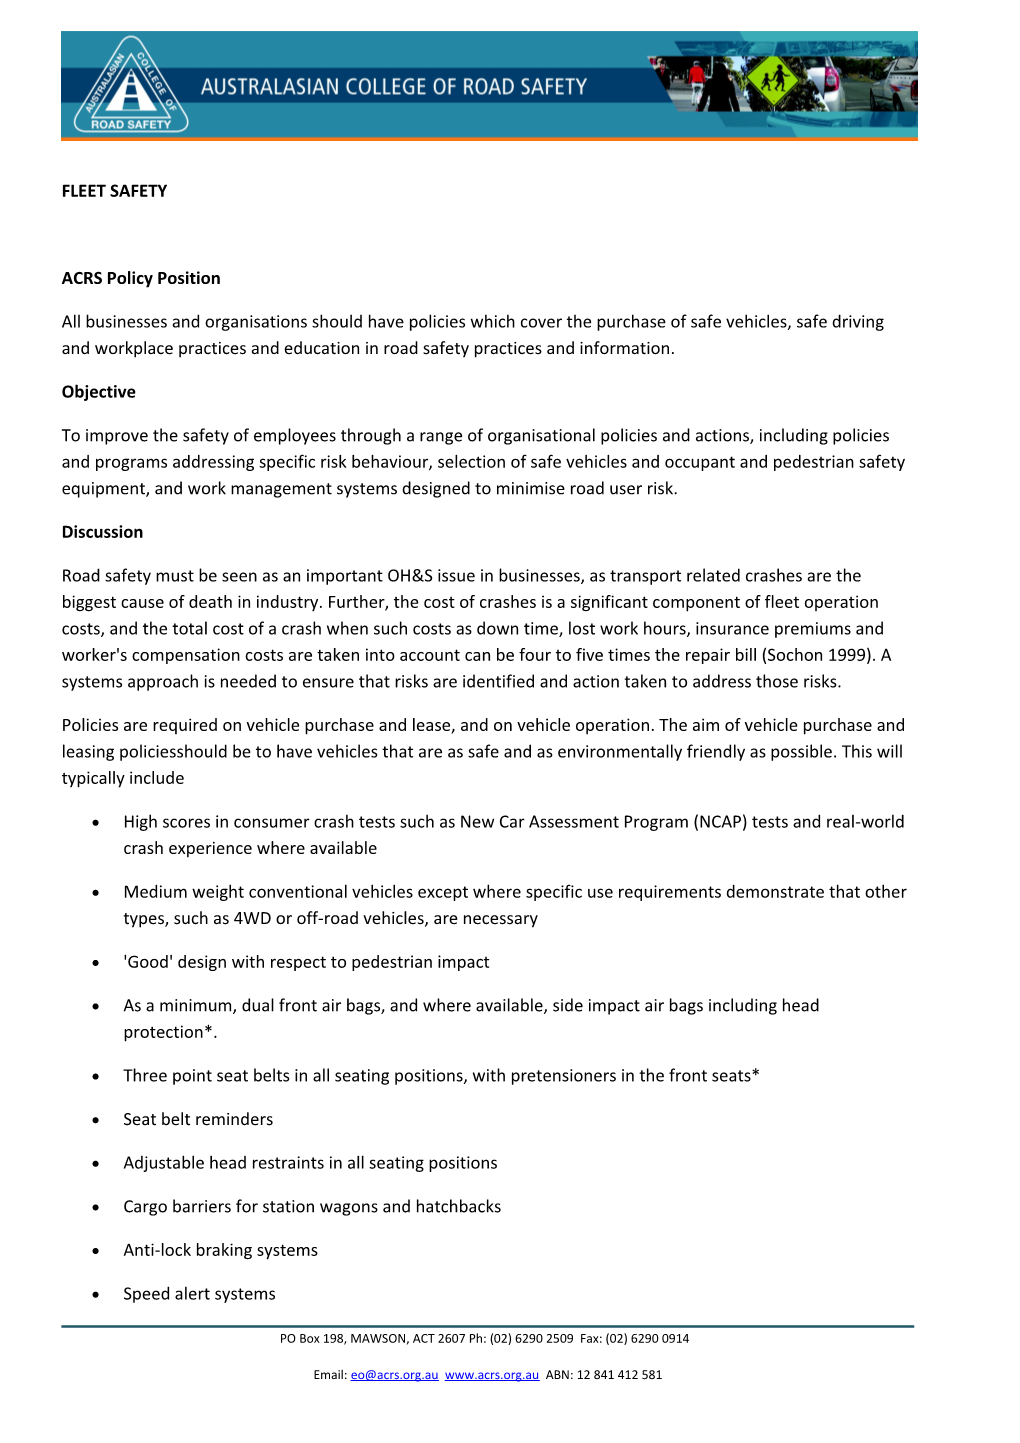 ACRS Policy Position